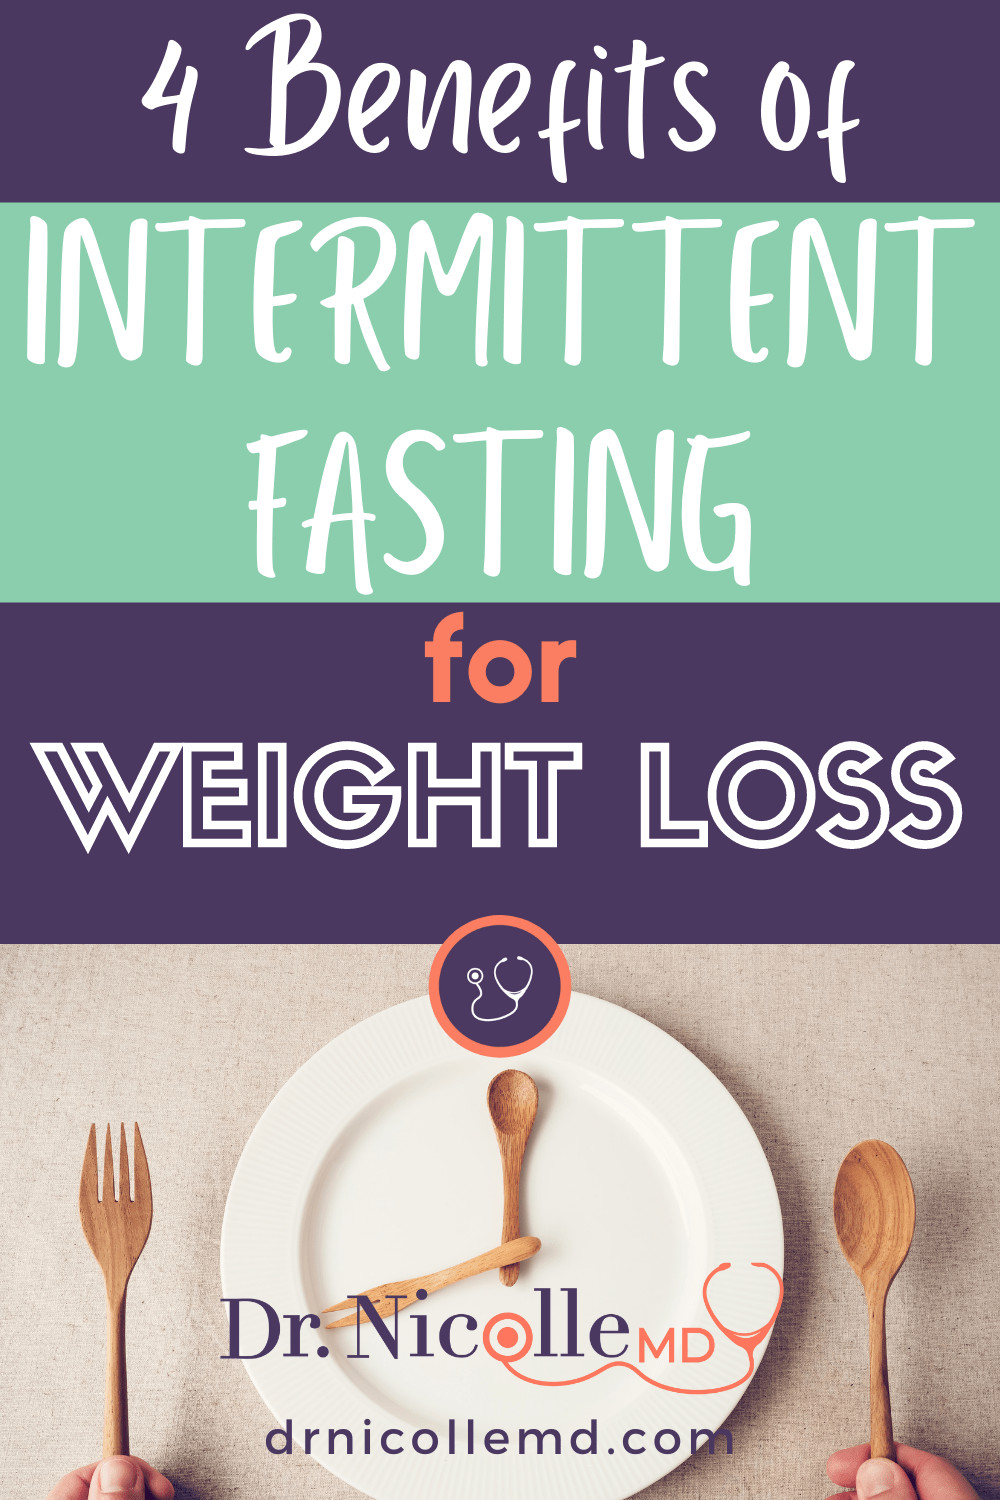 4 Benefits of Intermittent Fasting for Weight Loss